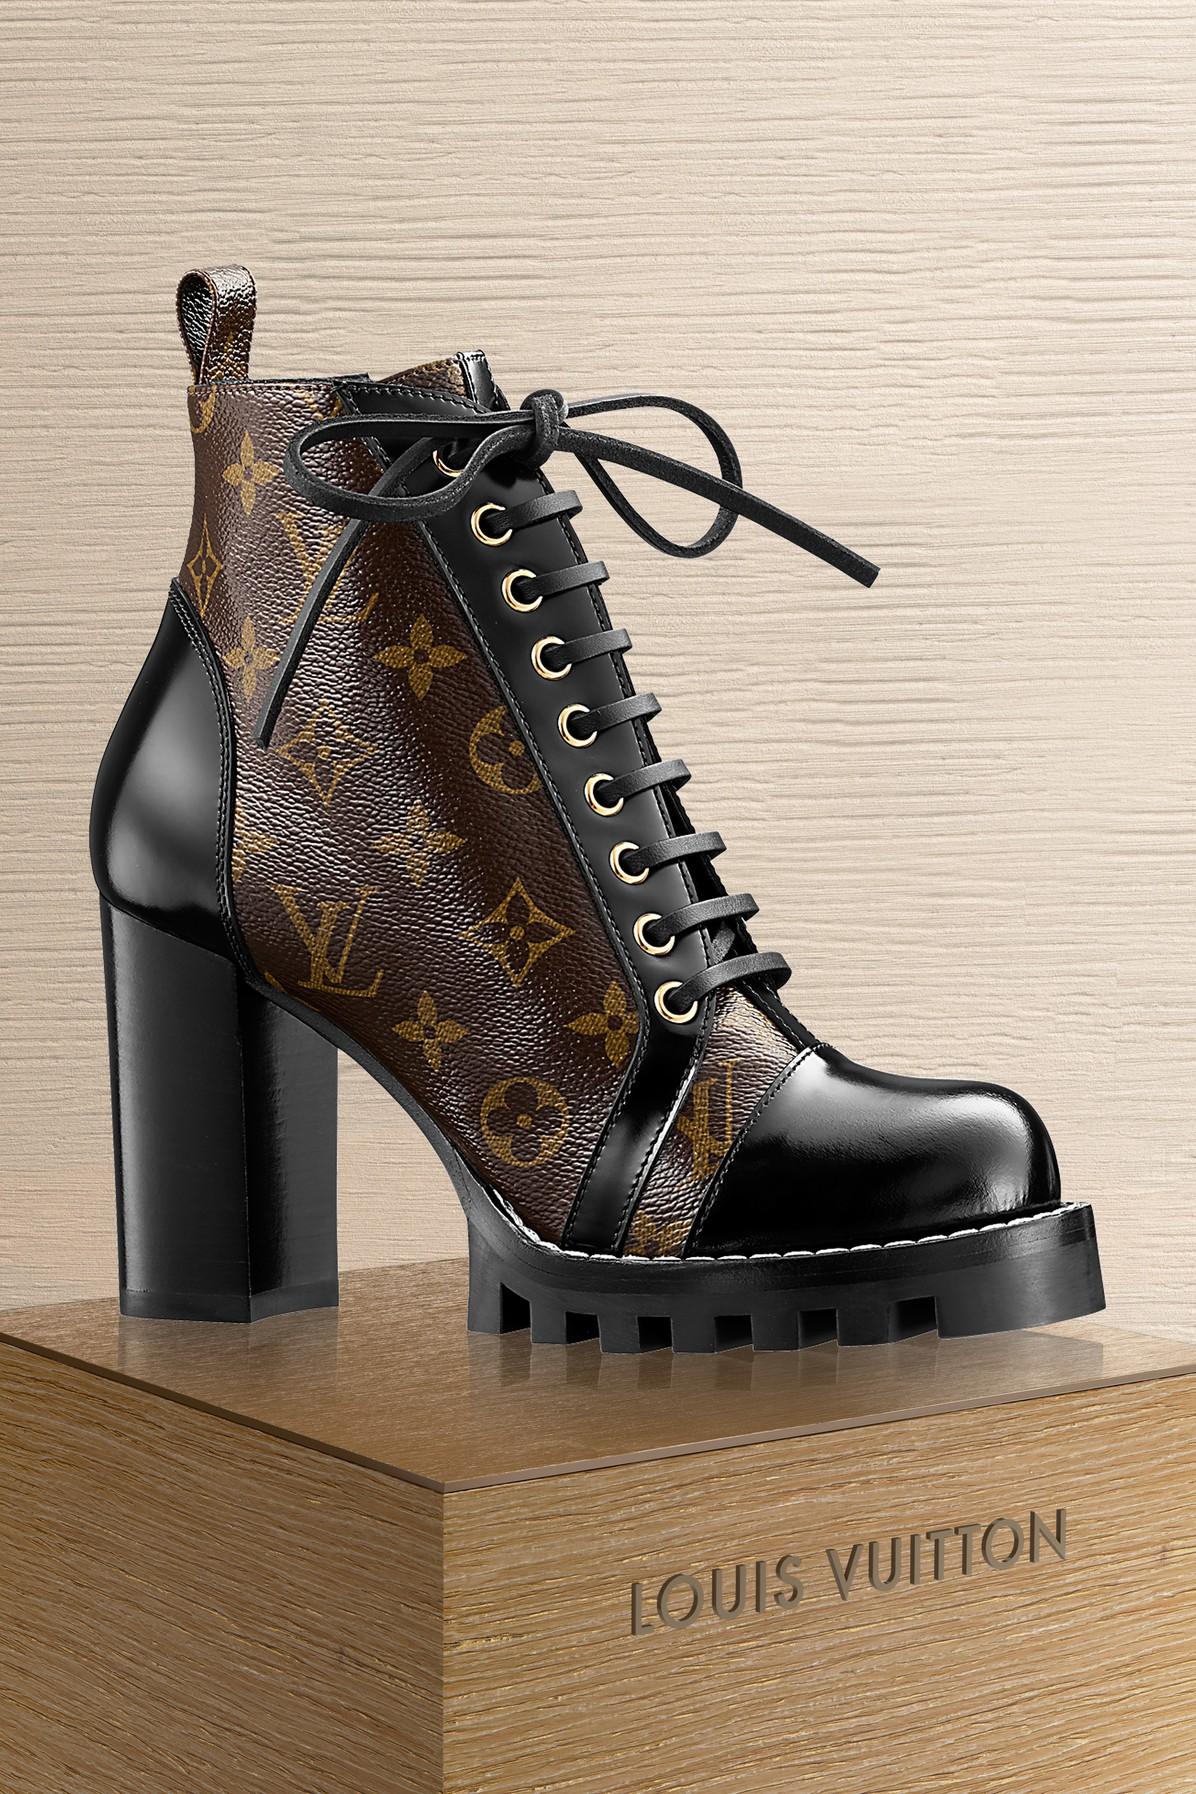 louis vuitton star ankle boots